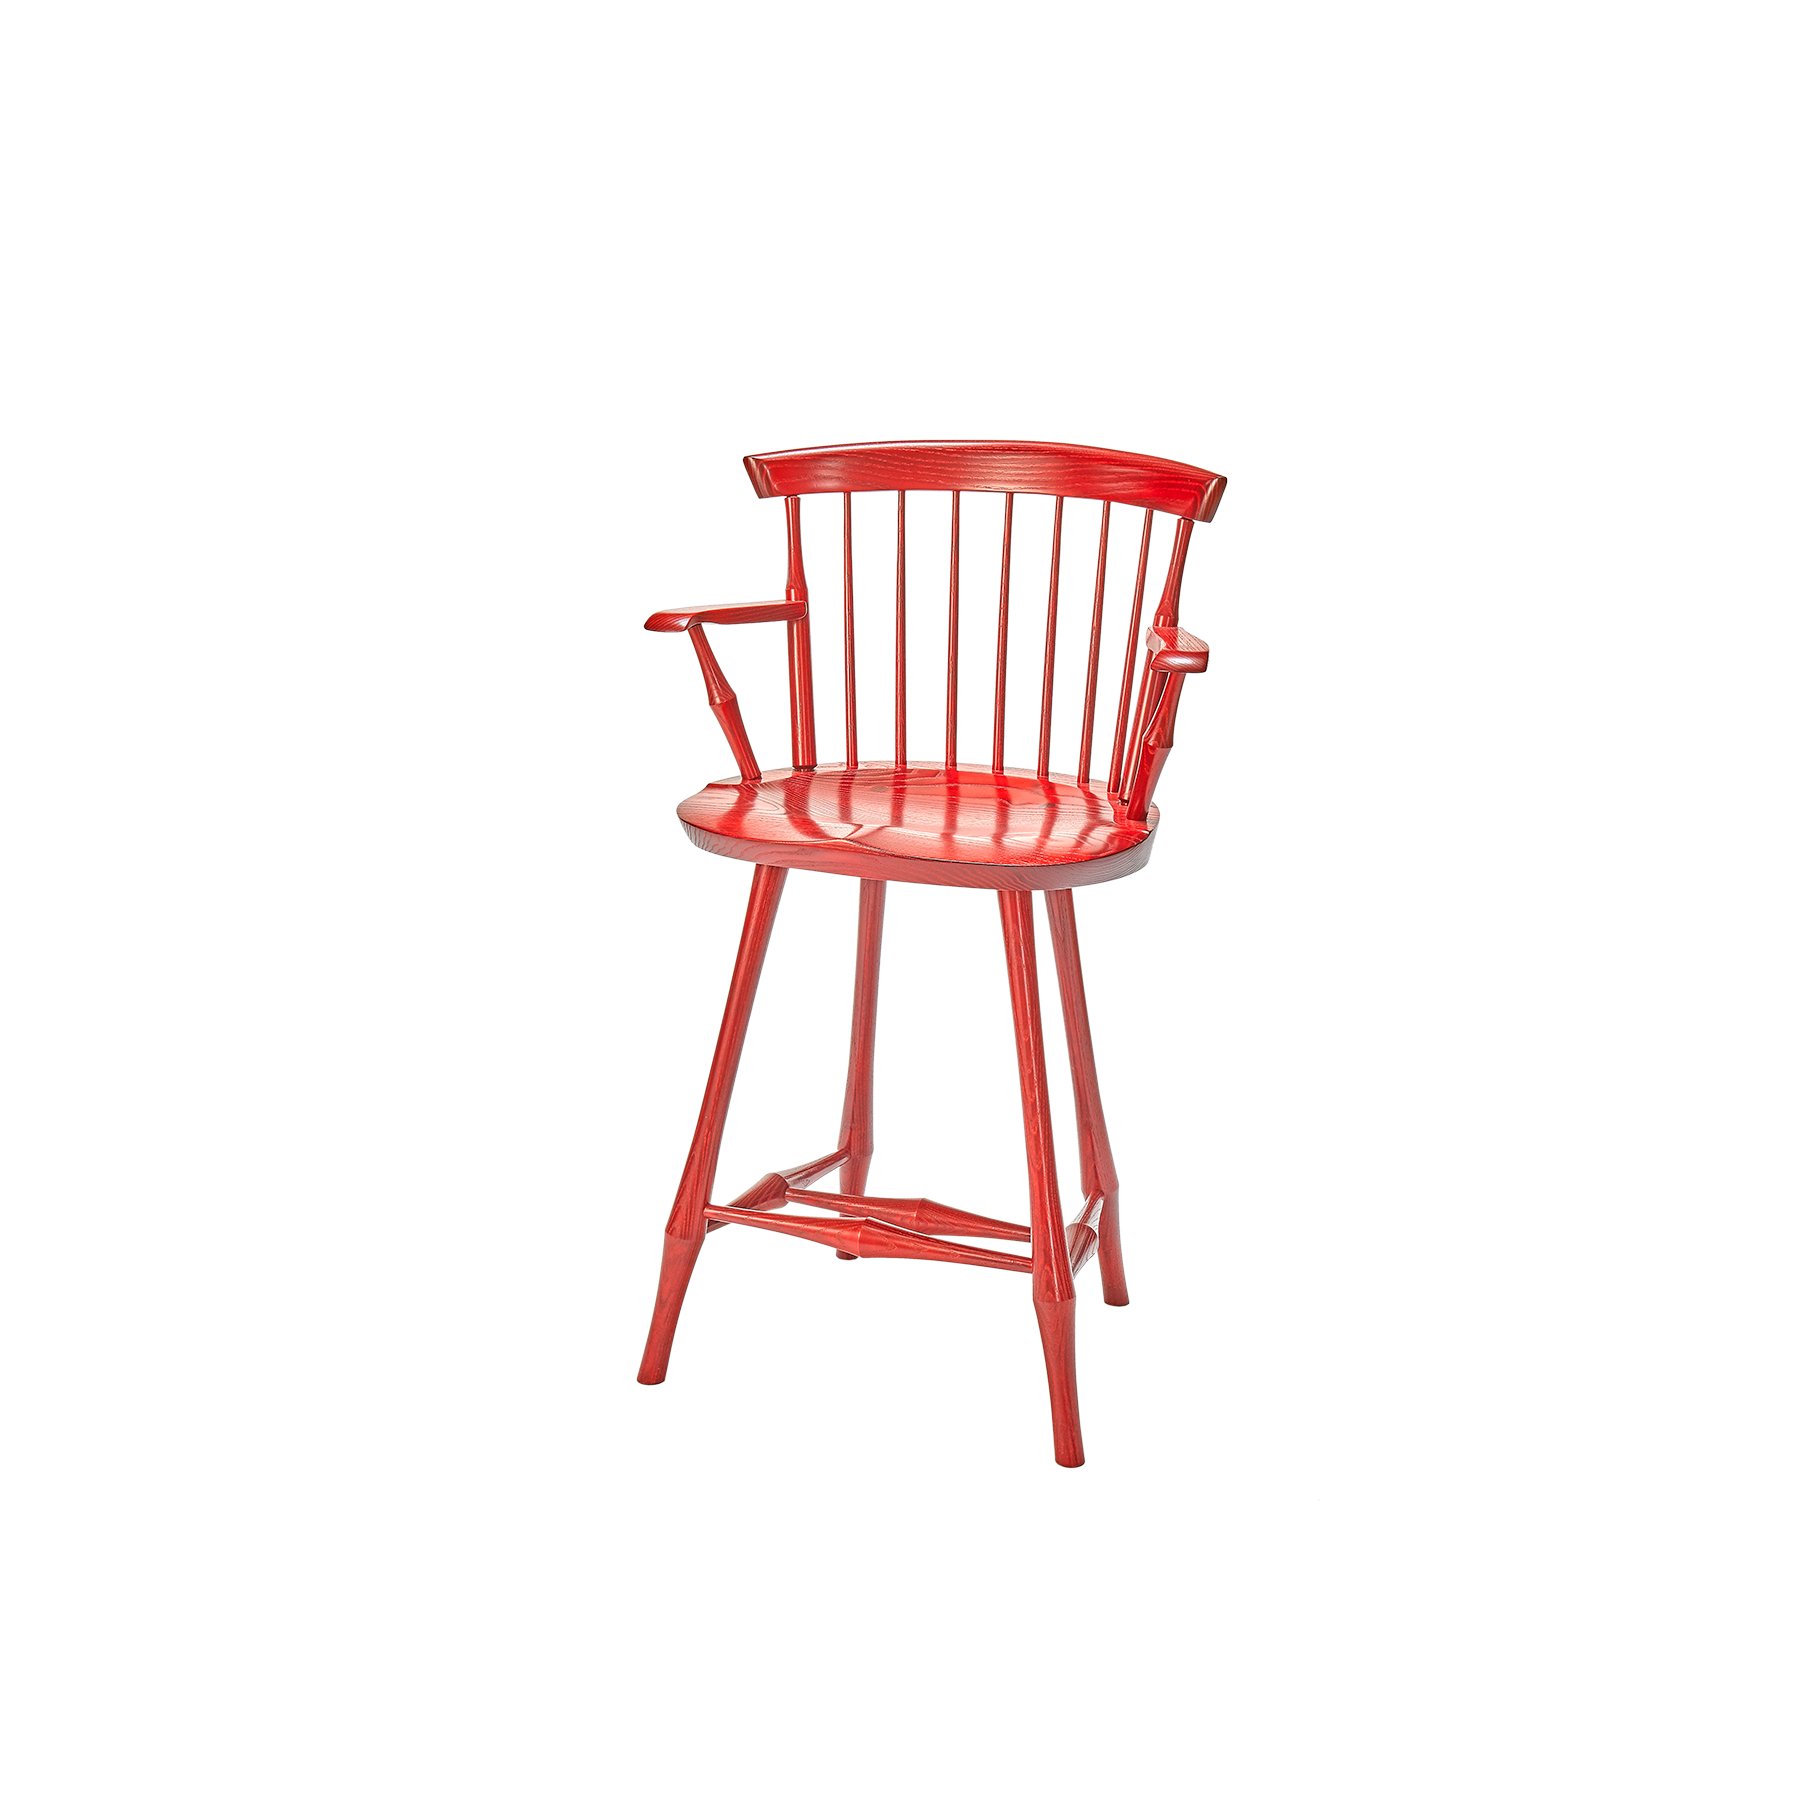 WIDE WAYLAND FAN-BACK STOOL WITH ARMS 24" - $1,645